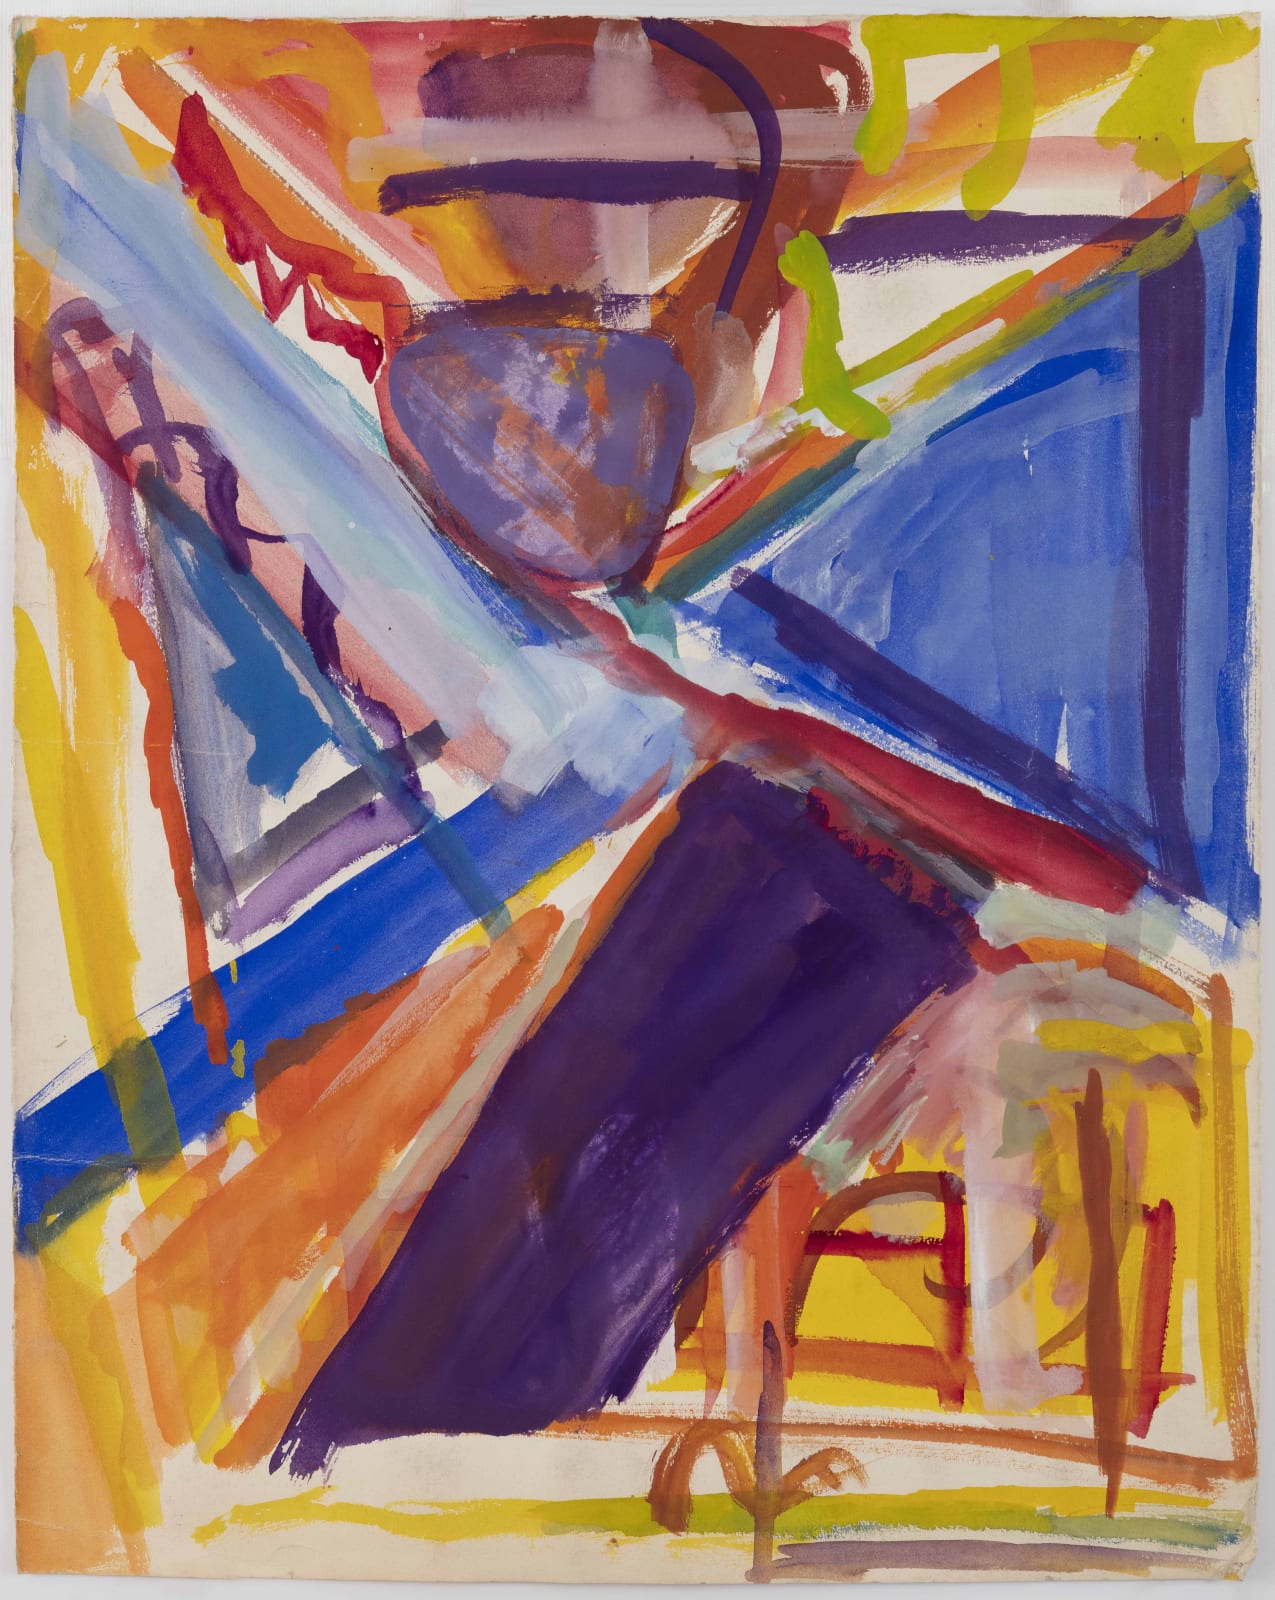 Shirley Jaffe Untitled, 1967-1970 ca. Mixed media on paper 64,5 x 50 cm (25 13/32 x 19 11/16 in) framed